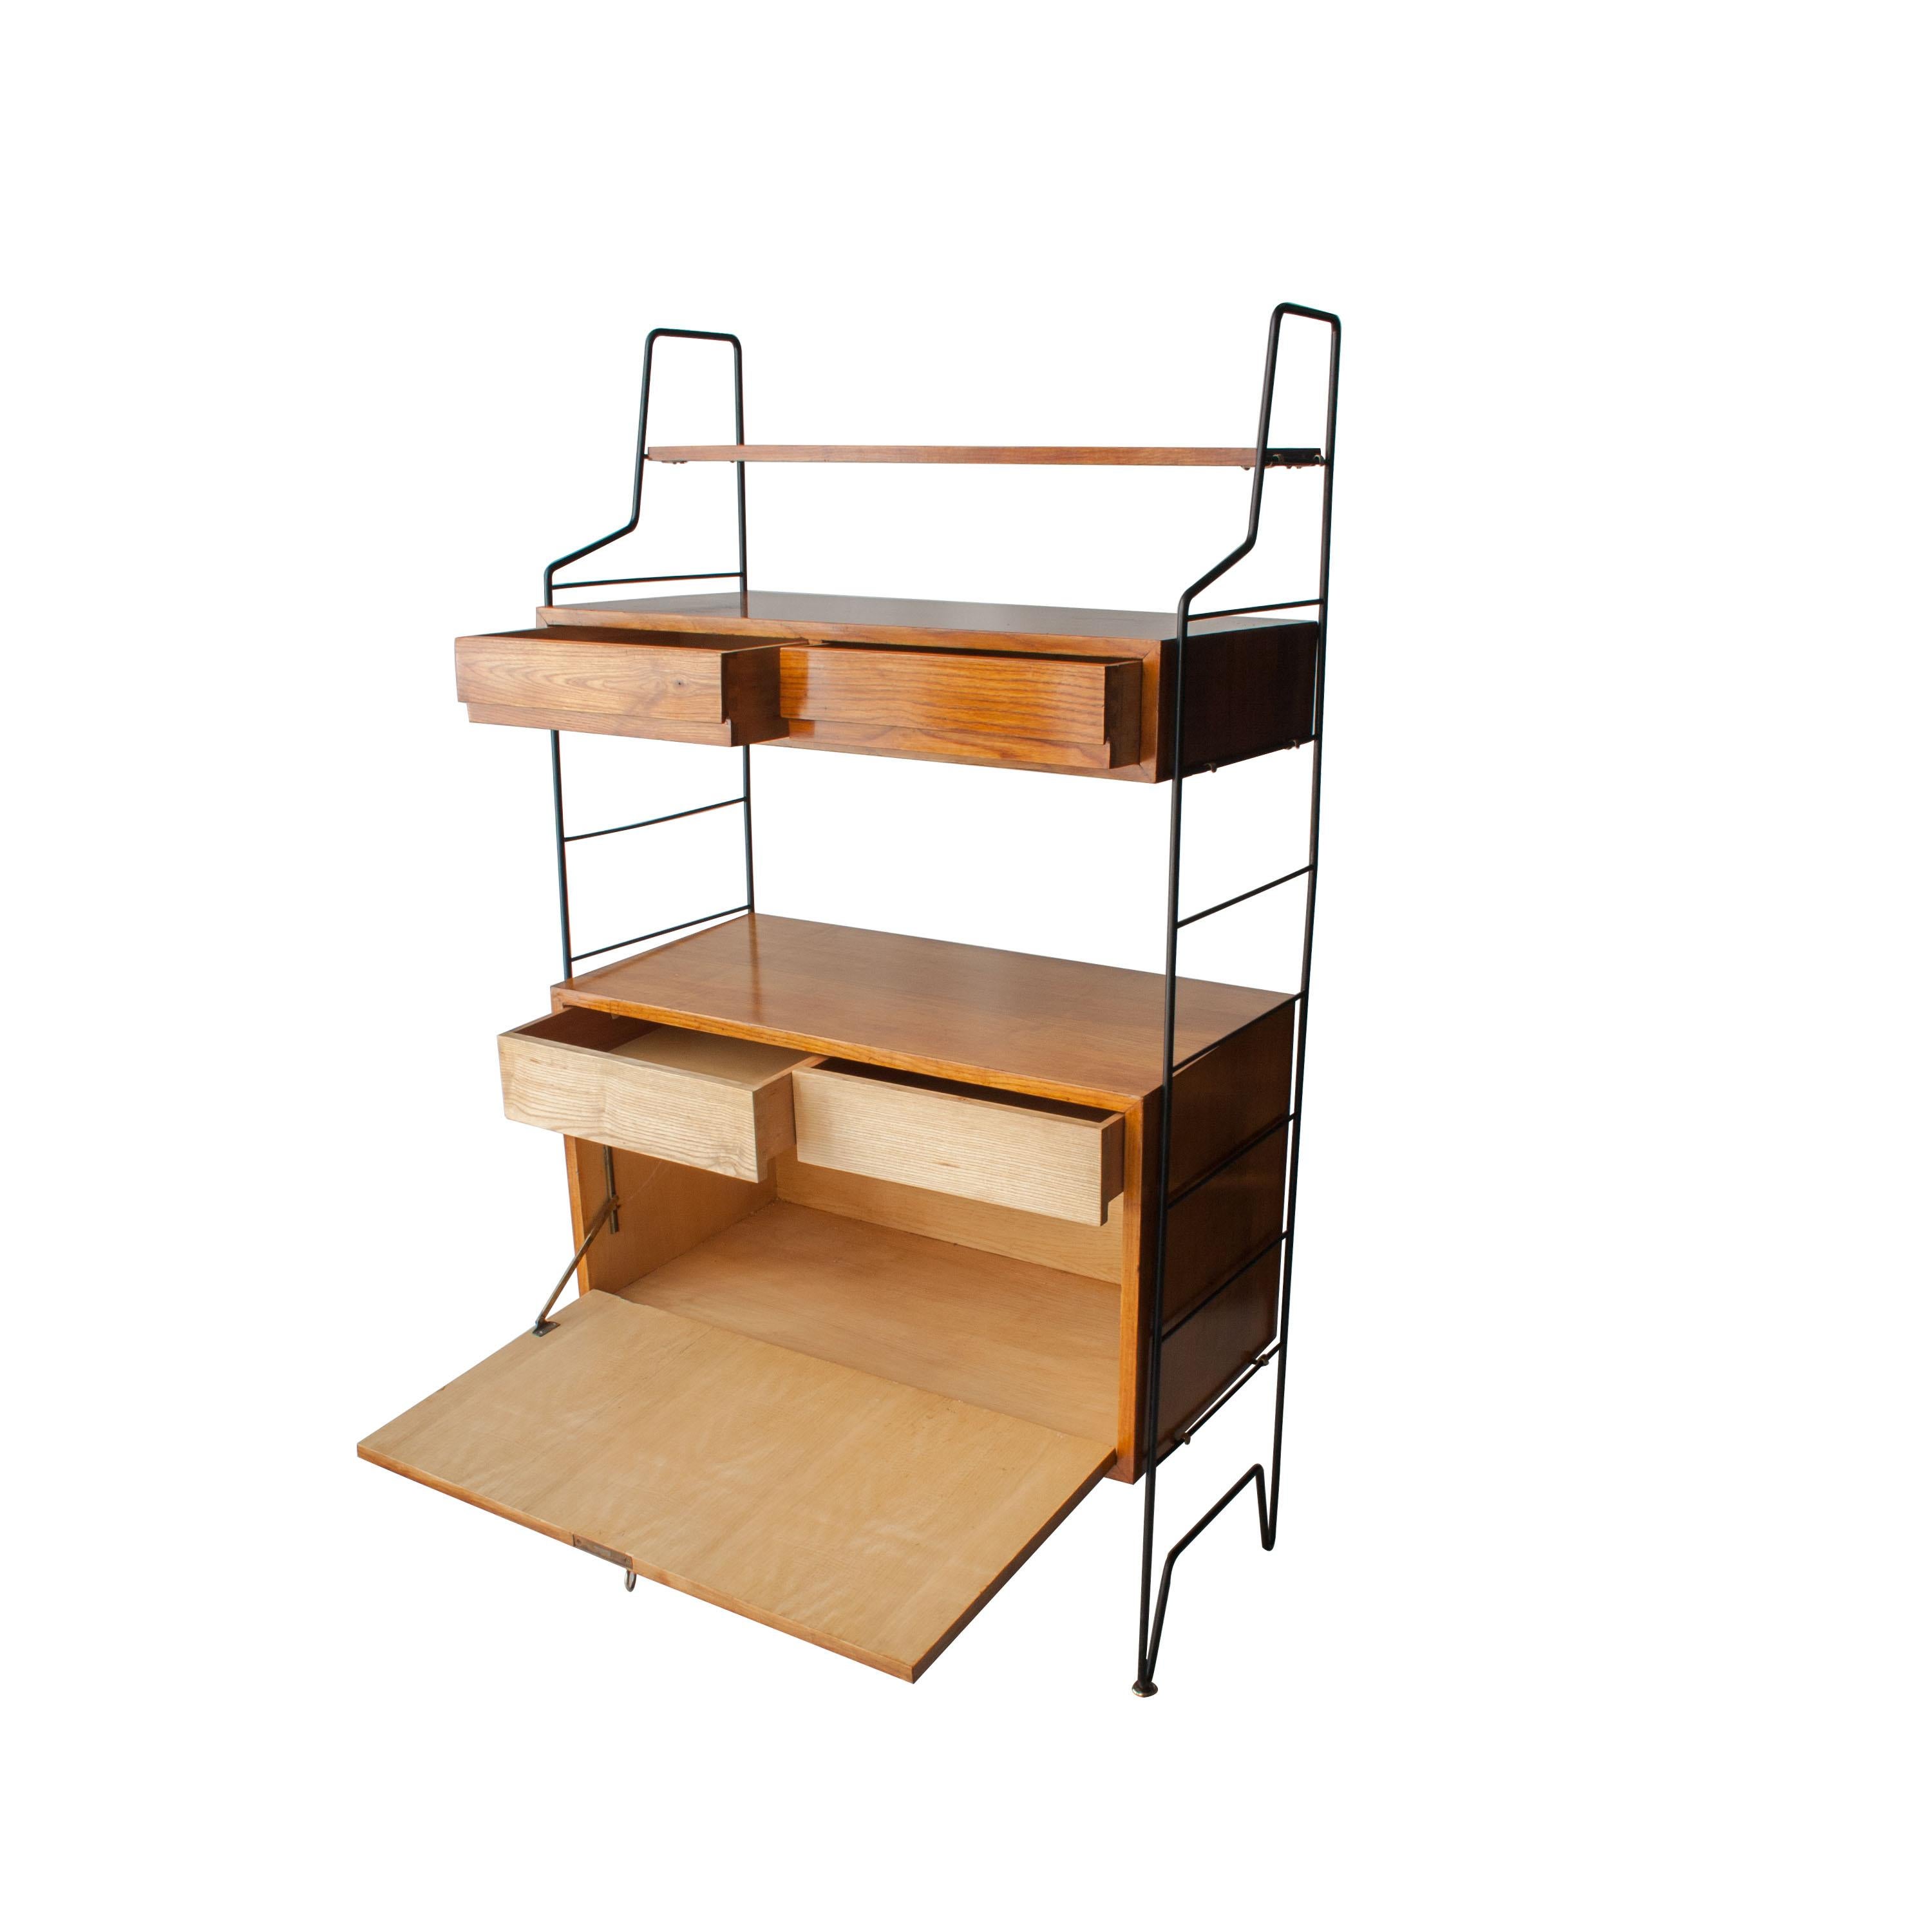 Shelving designed by Isa Bergamo. Metal structure with 3 modules, shelves, drawers and a hinged door.